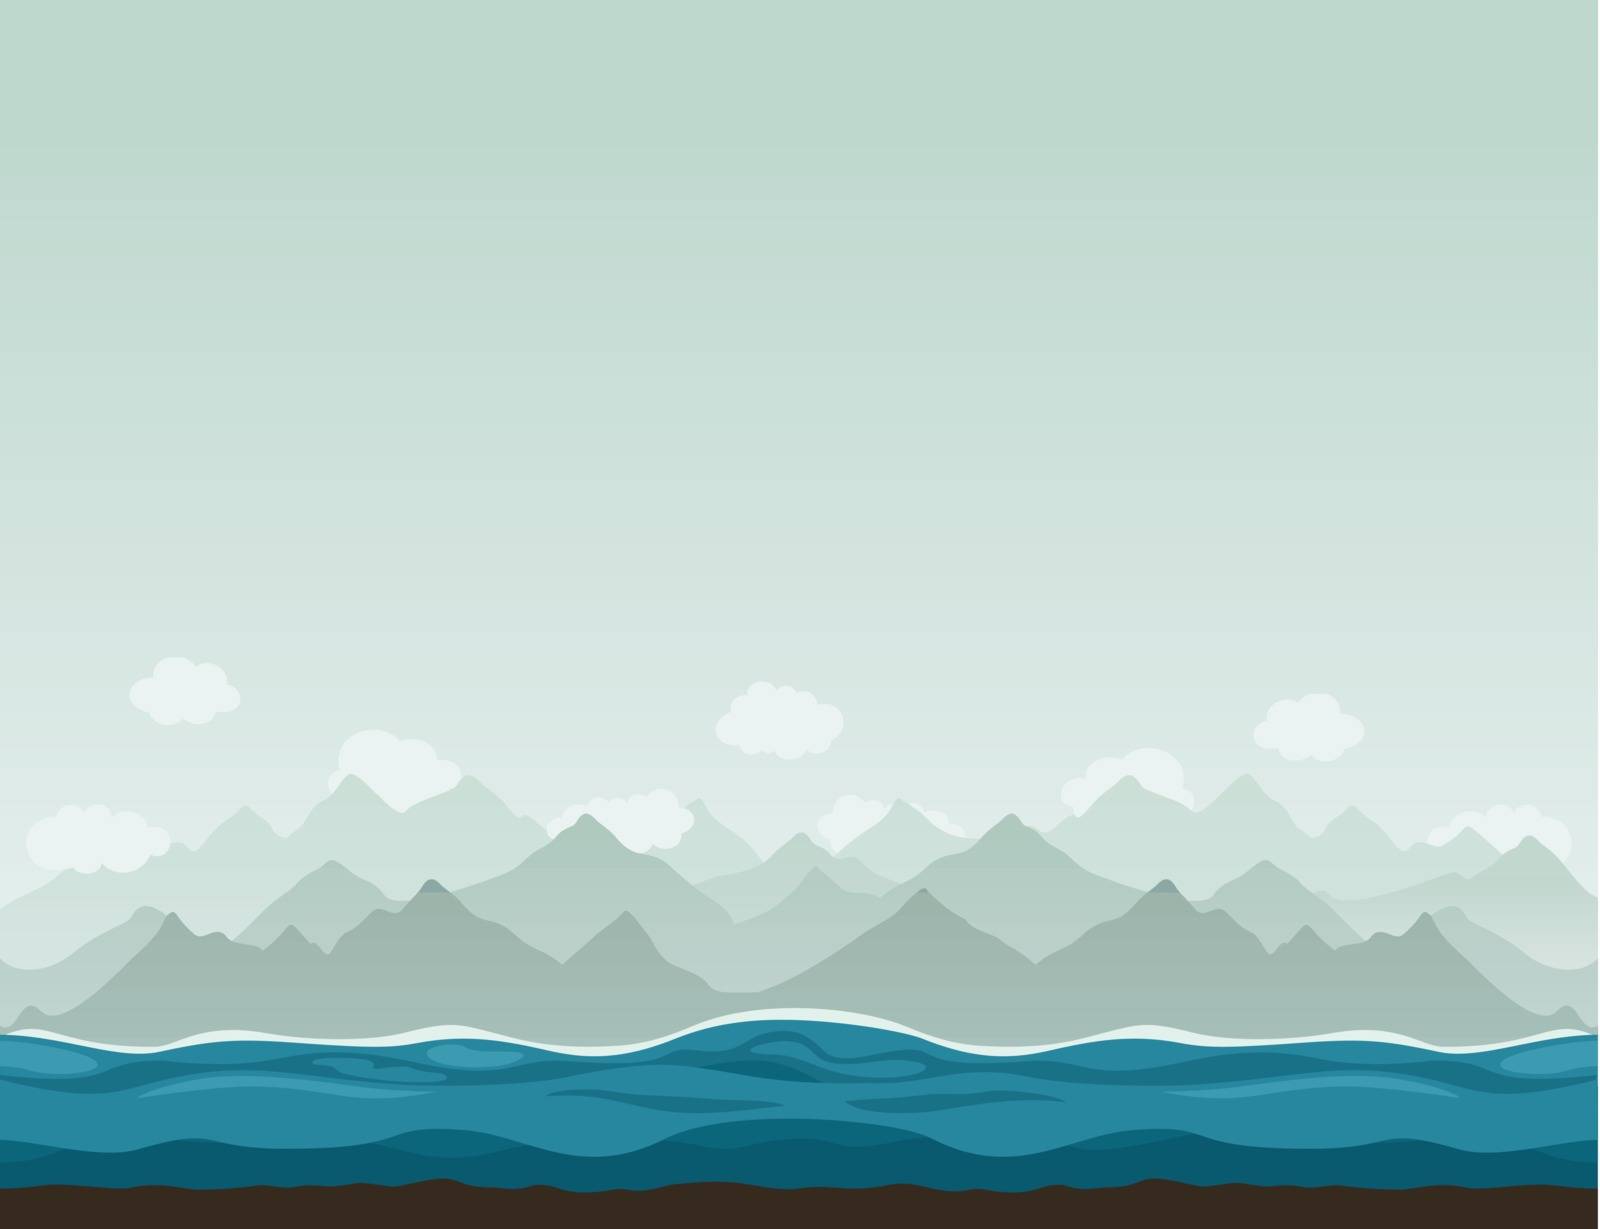 The sea against mountains. A vector illustration